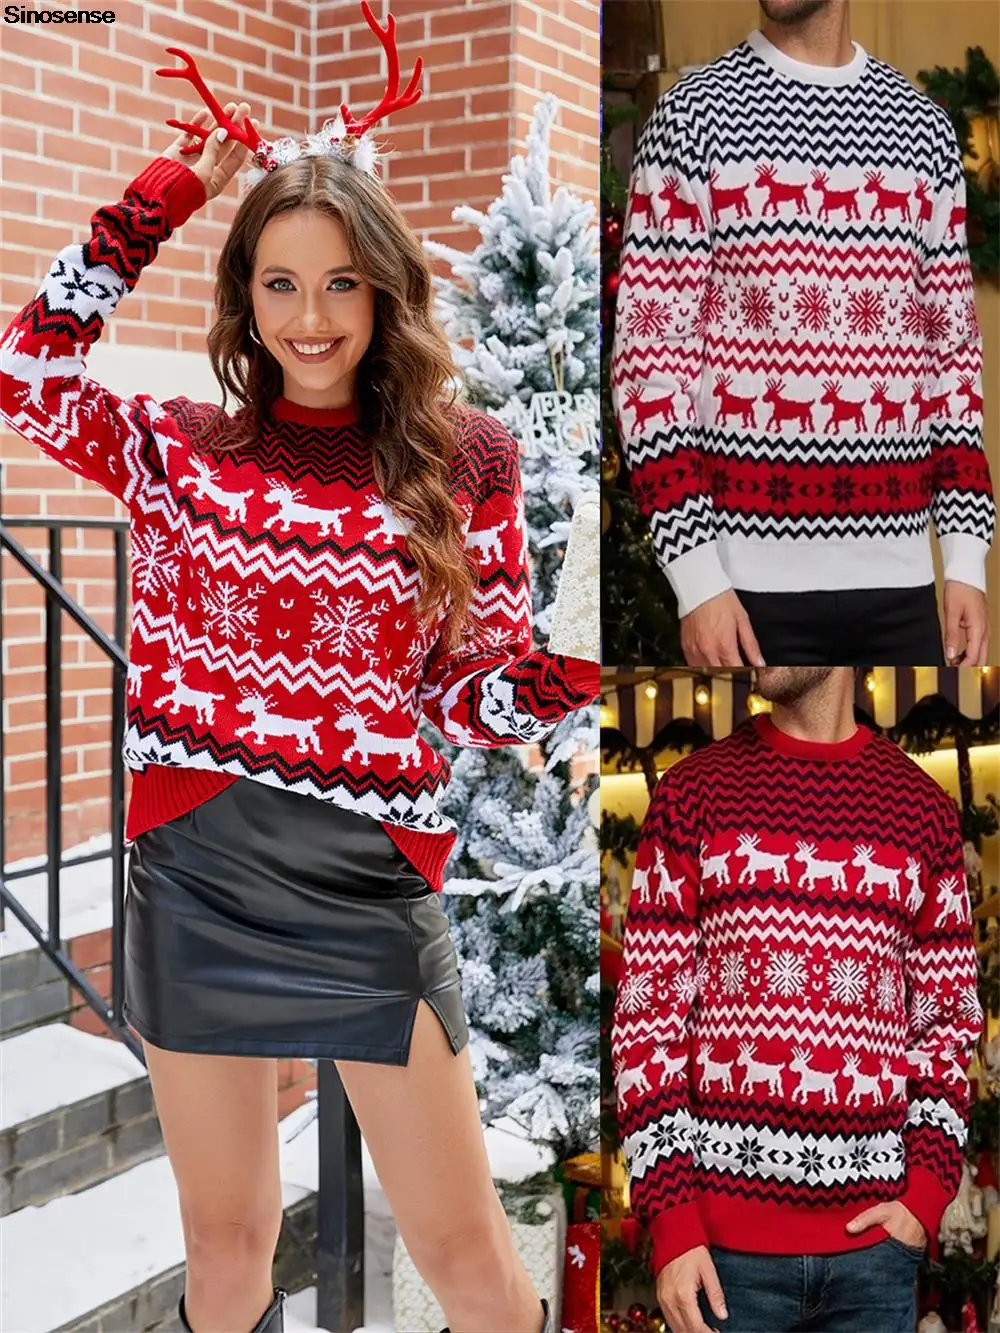 

Women Men New Year Eve Ugly Christmas Sweaters Snowflake Reindeer Holiday Party Knit Sweater Pullover Xmas Knitted Jumpers Tops